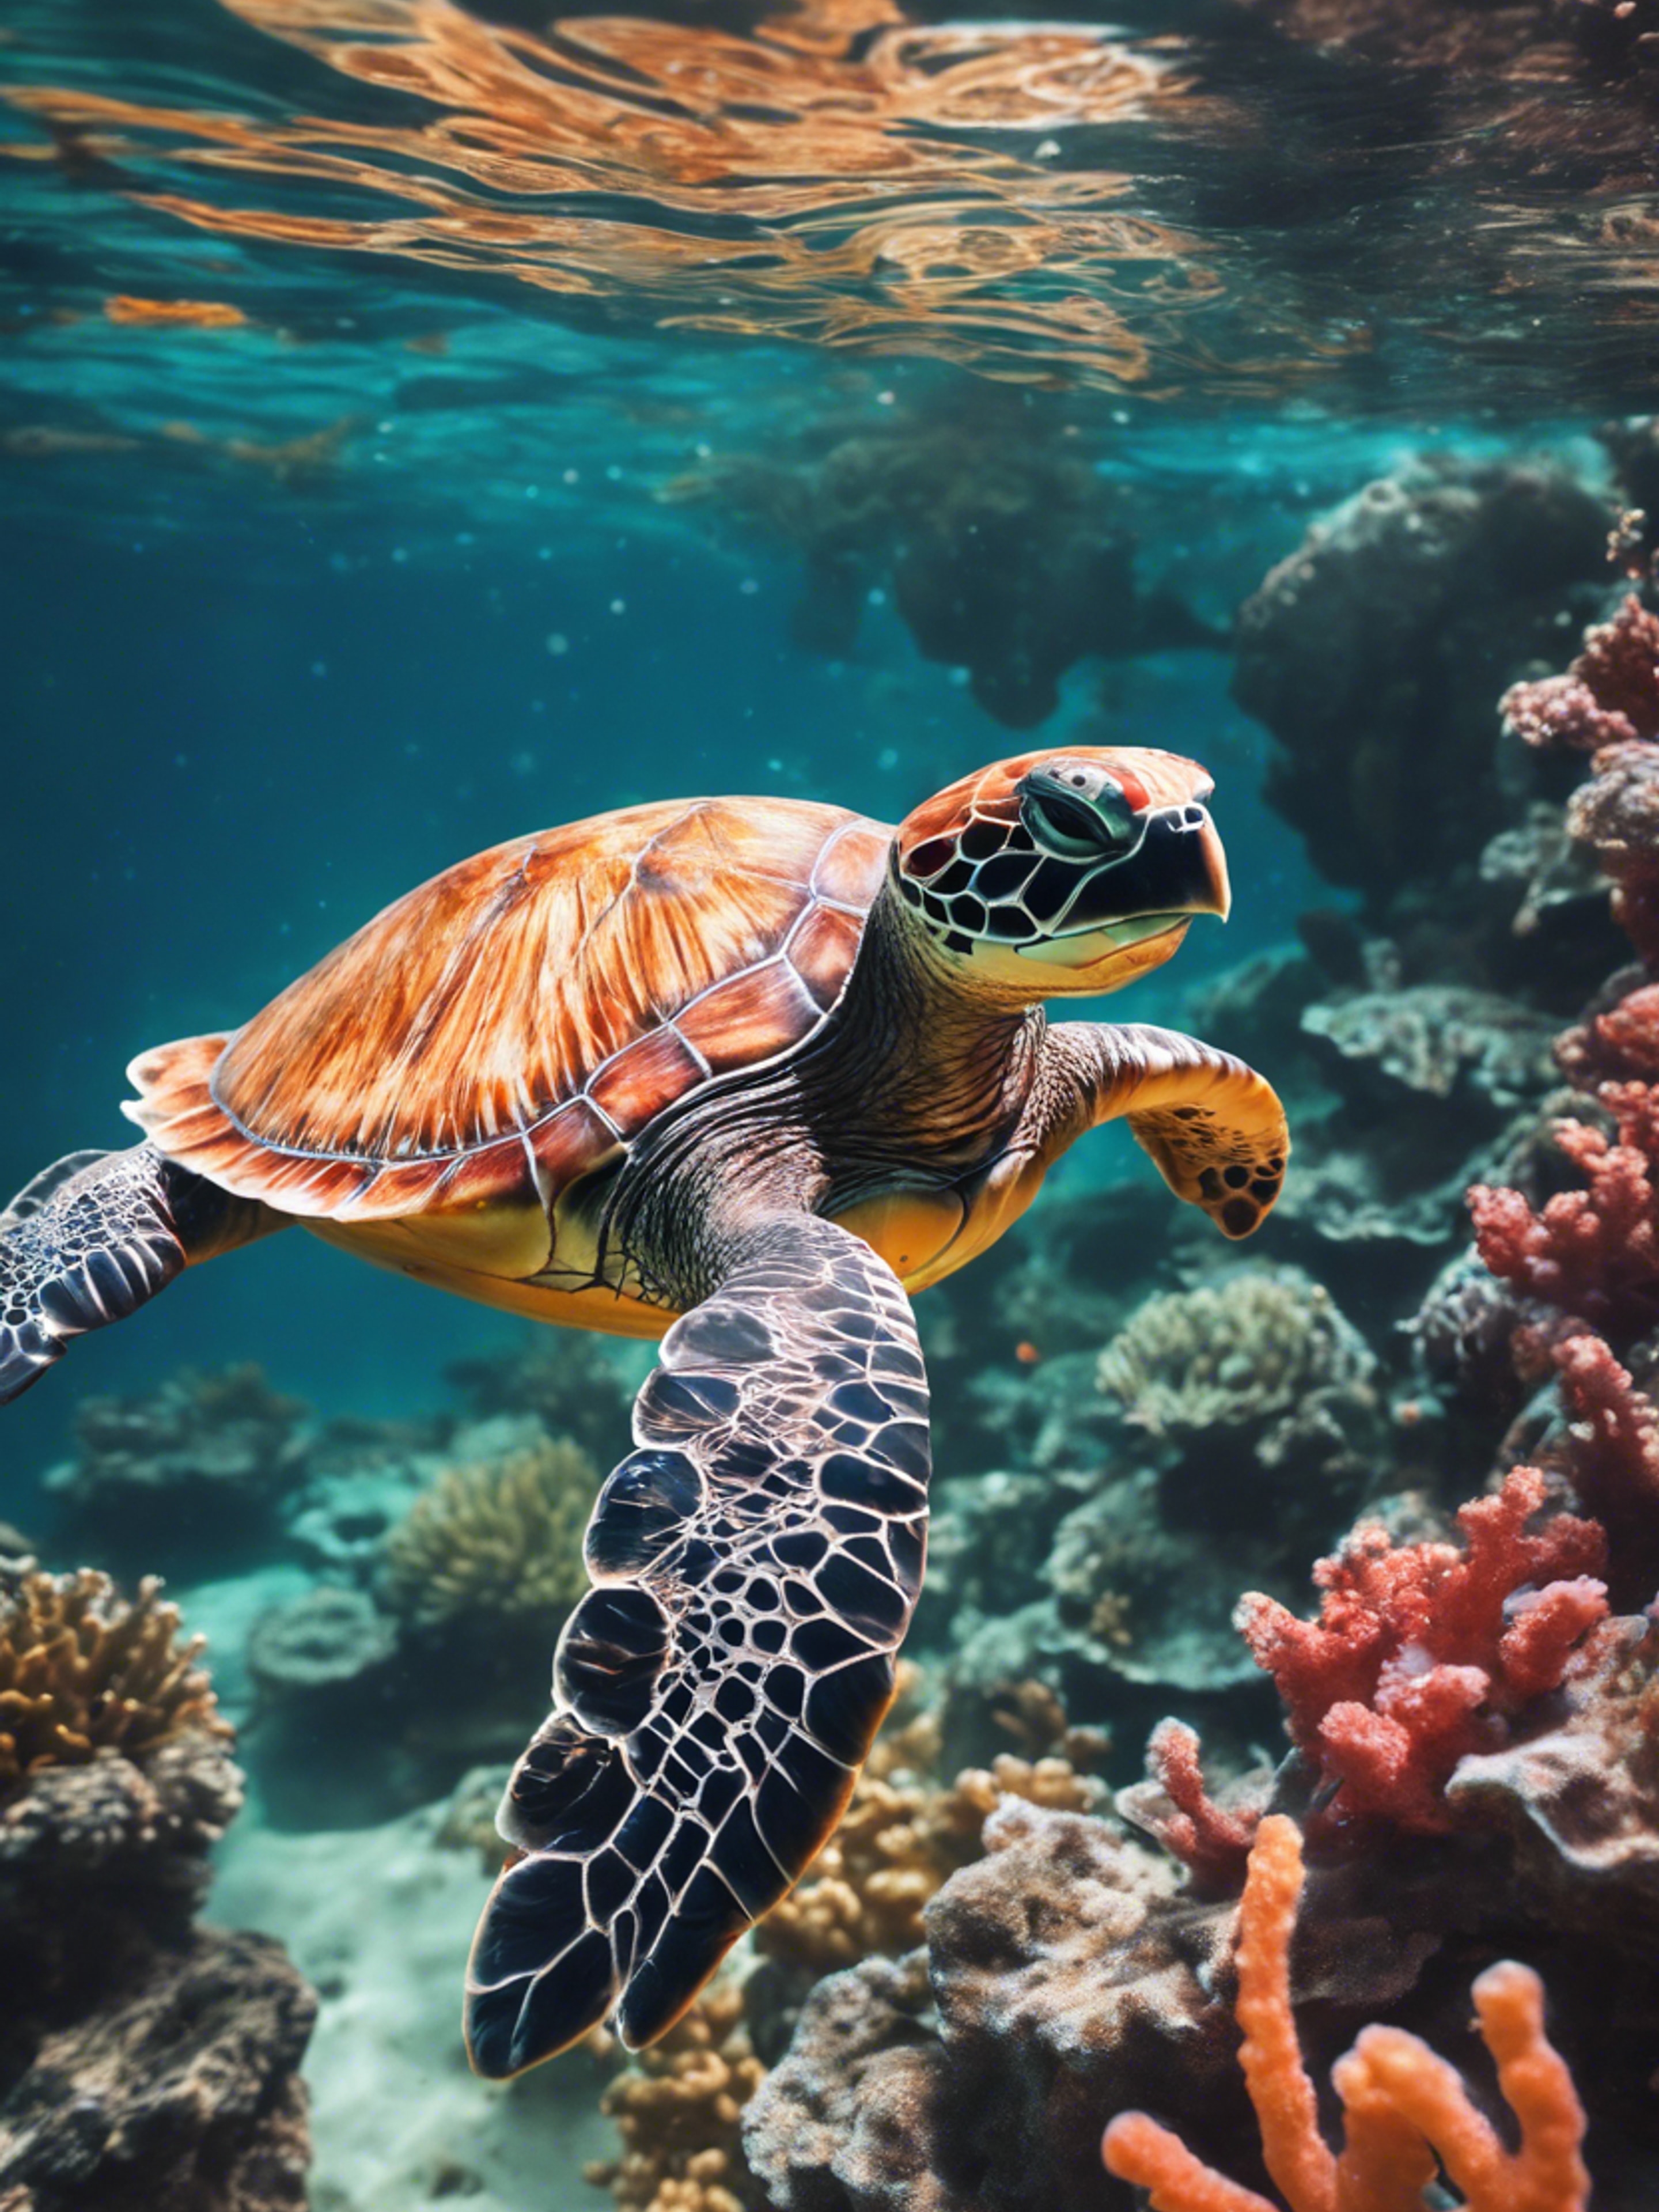 Underwater shot of a sea turtle gliding through clusters of colorful coral. Hintergrund[31f5dd2c5e3745af9533]